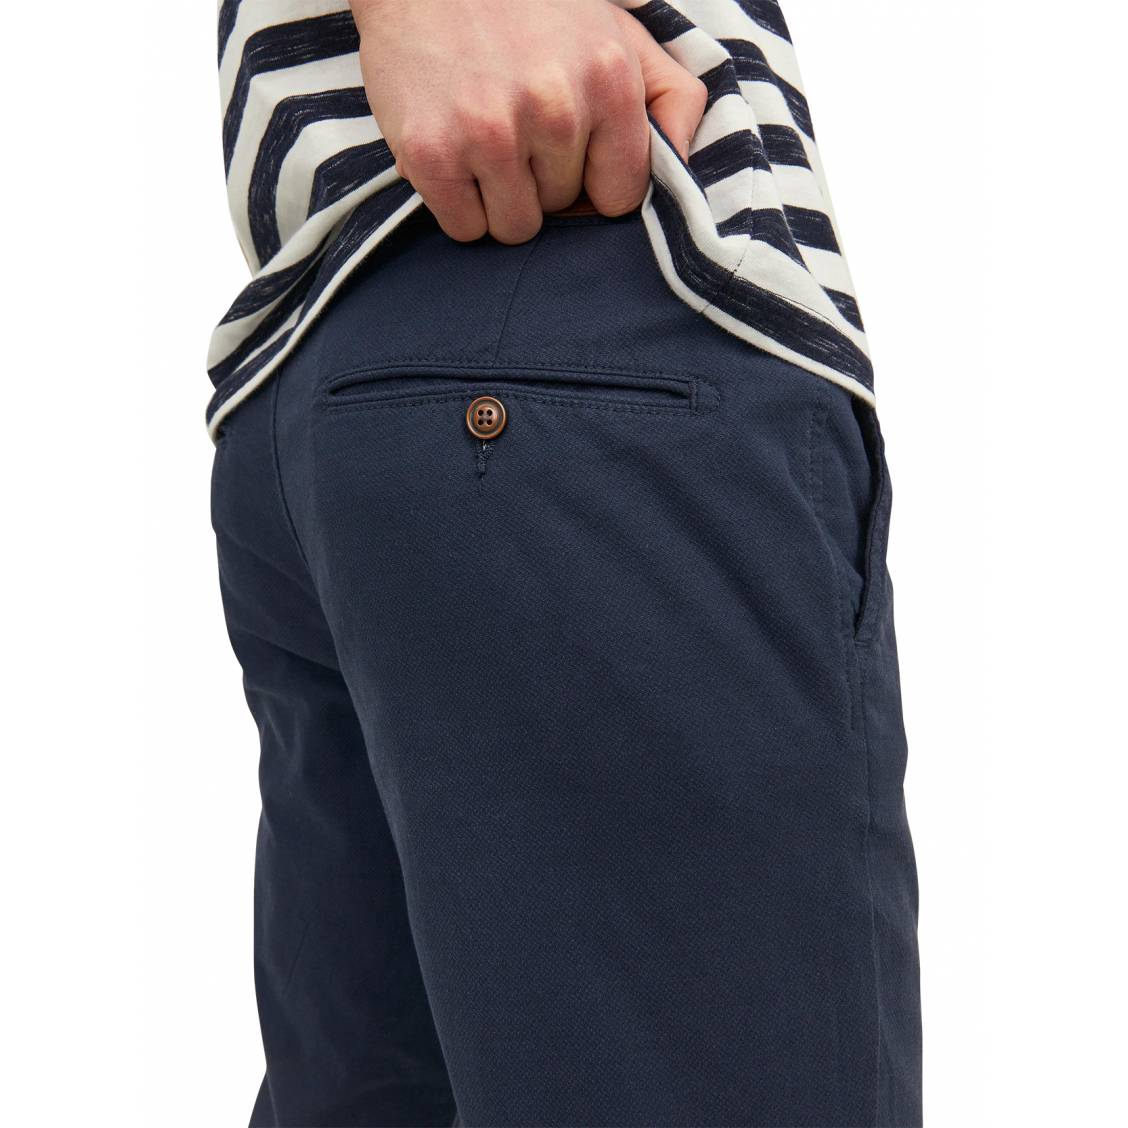 CHINO HOMME MARINE MARCO LONGUEUR 34